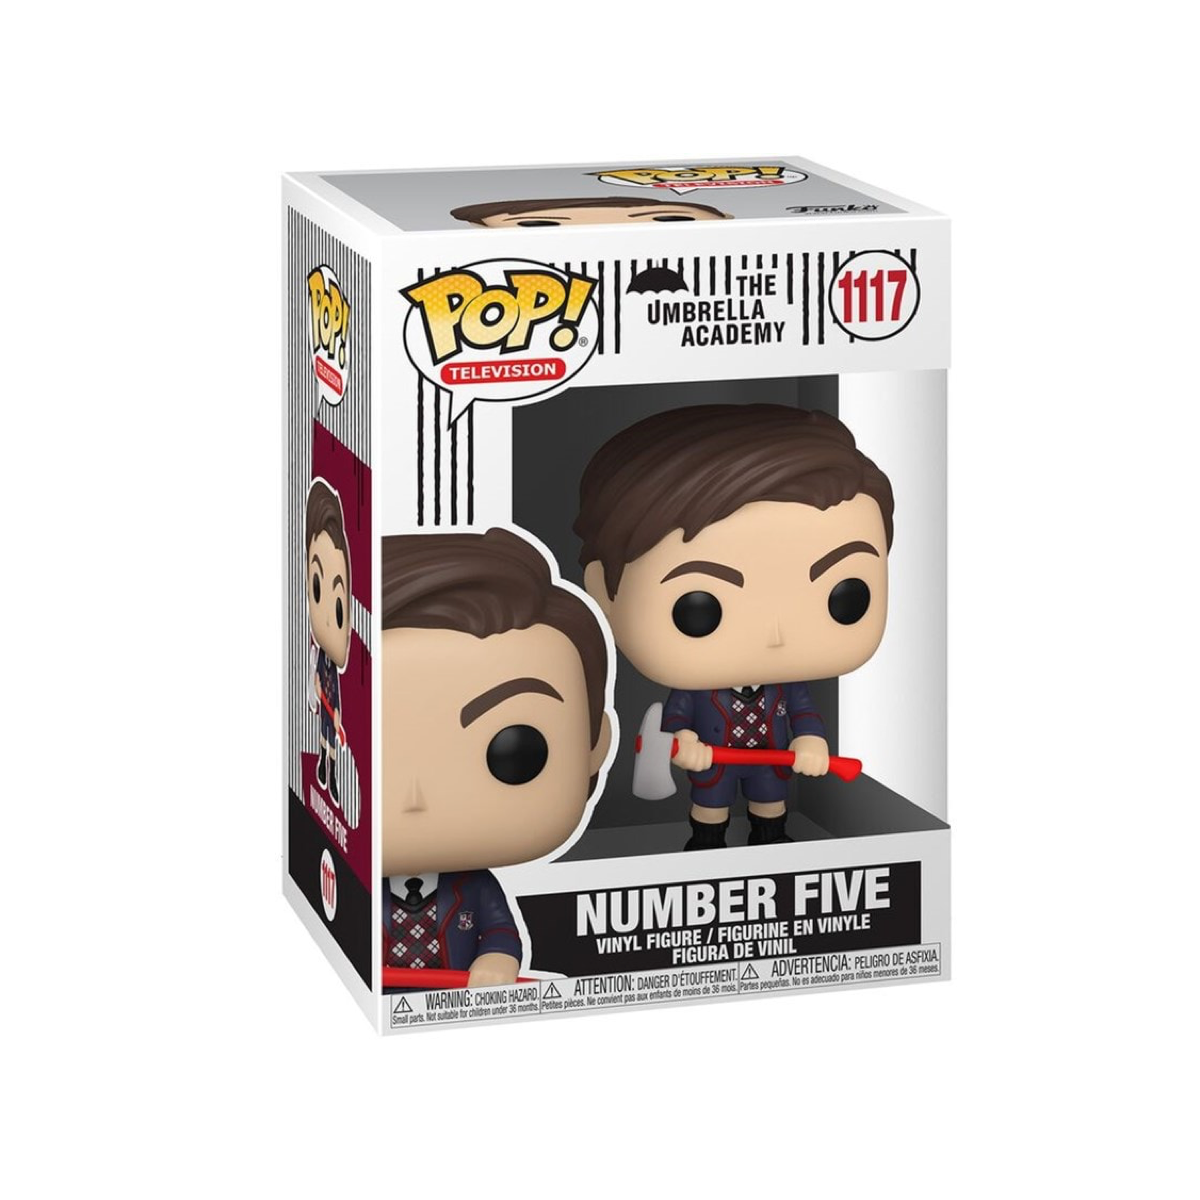 NUMBER FIVE WITH AXE THE UMBRELLA ACADEMY #1117 FUNKO POP!